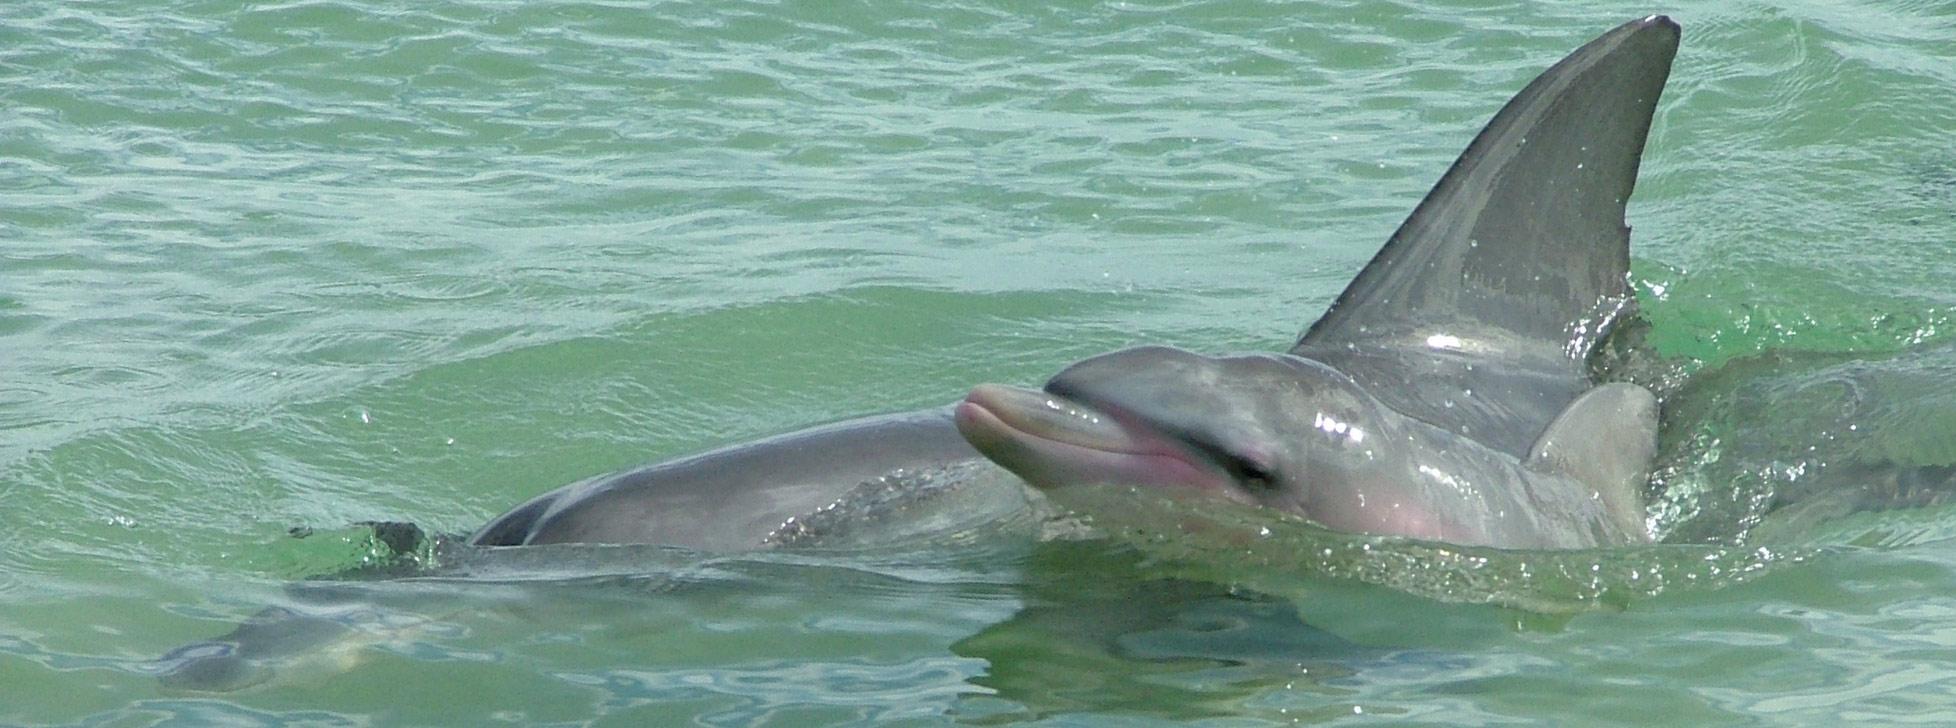 Dolphin Watching at Monkey Mia Dolphins Resort